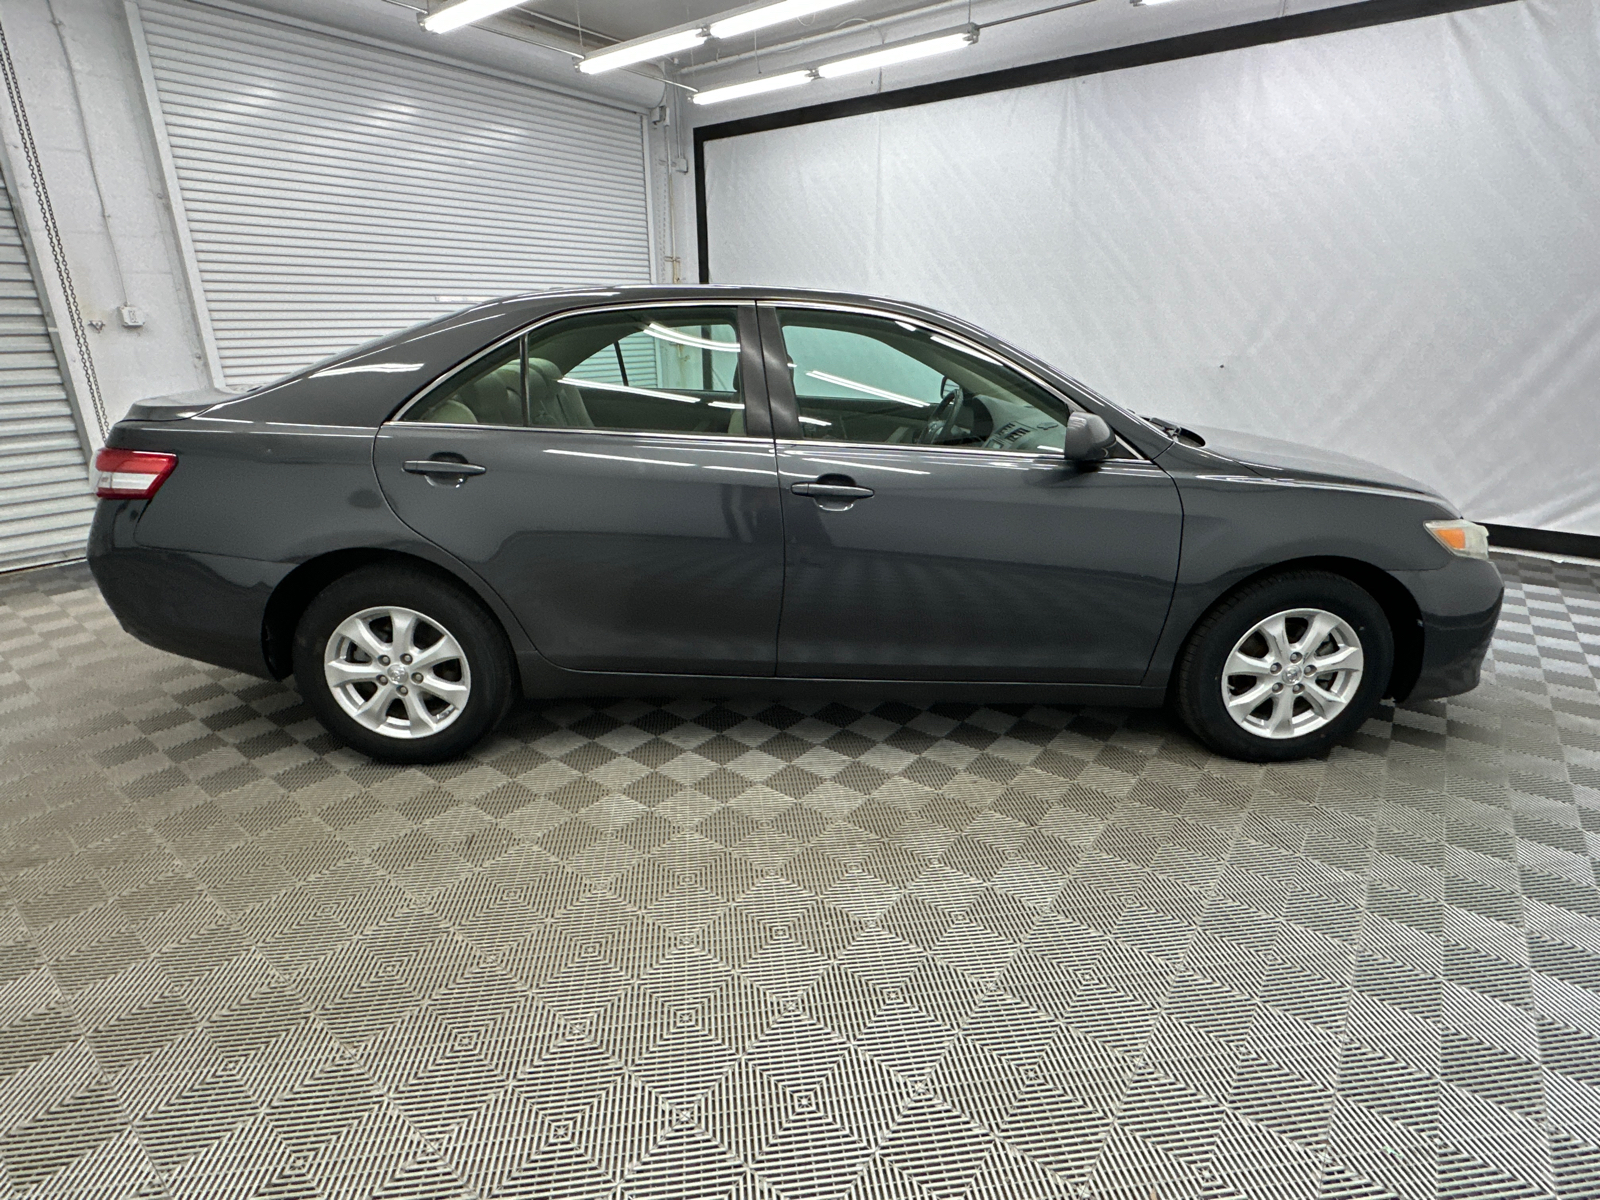 2011 Toyota Camry LE 6